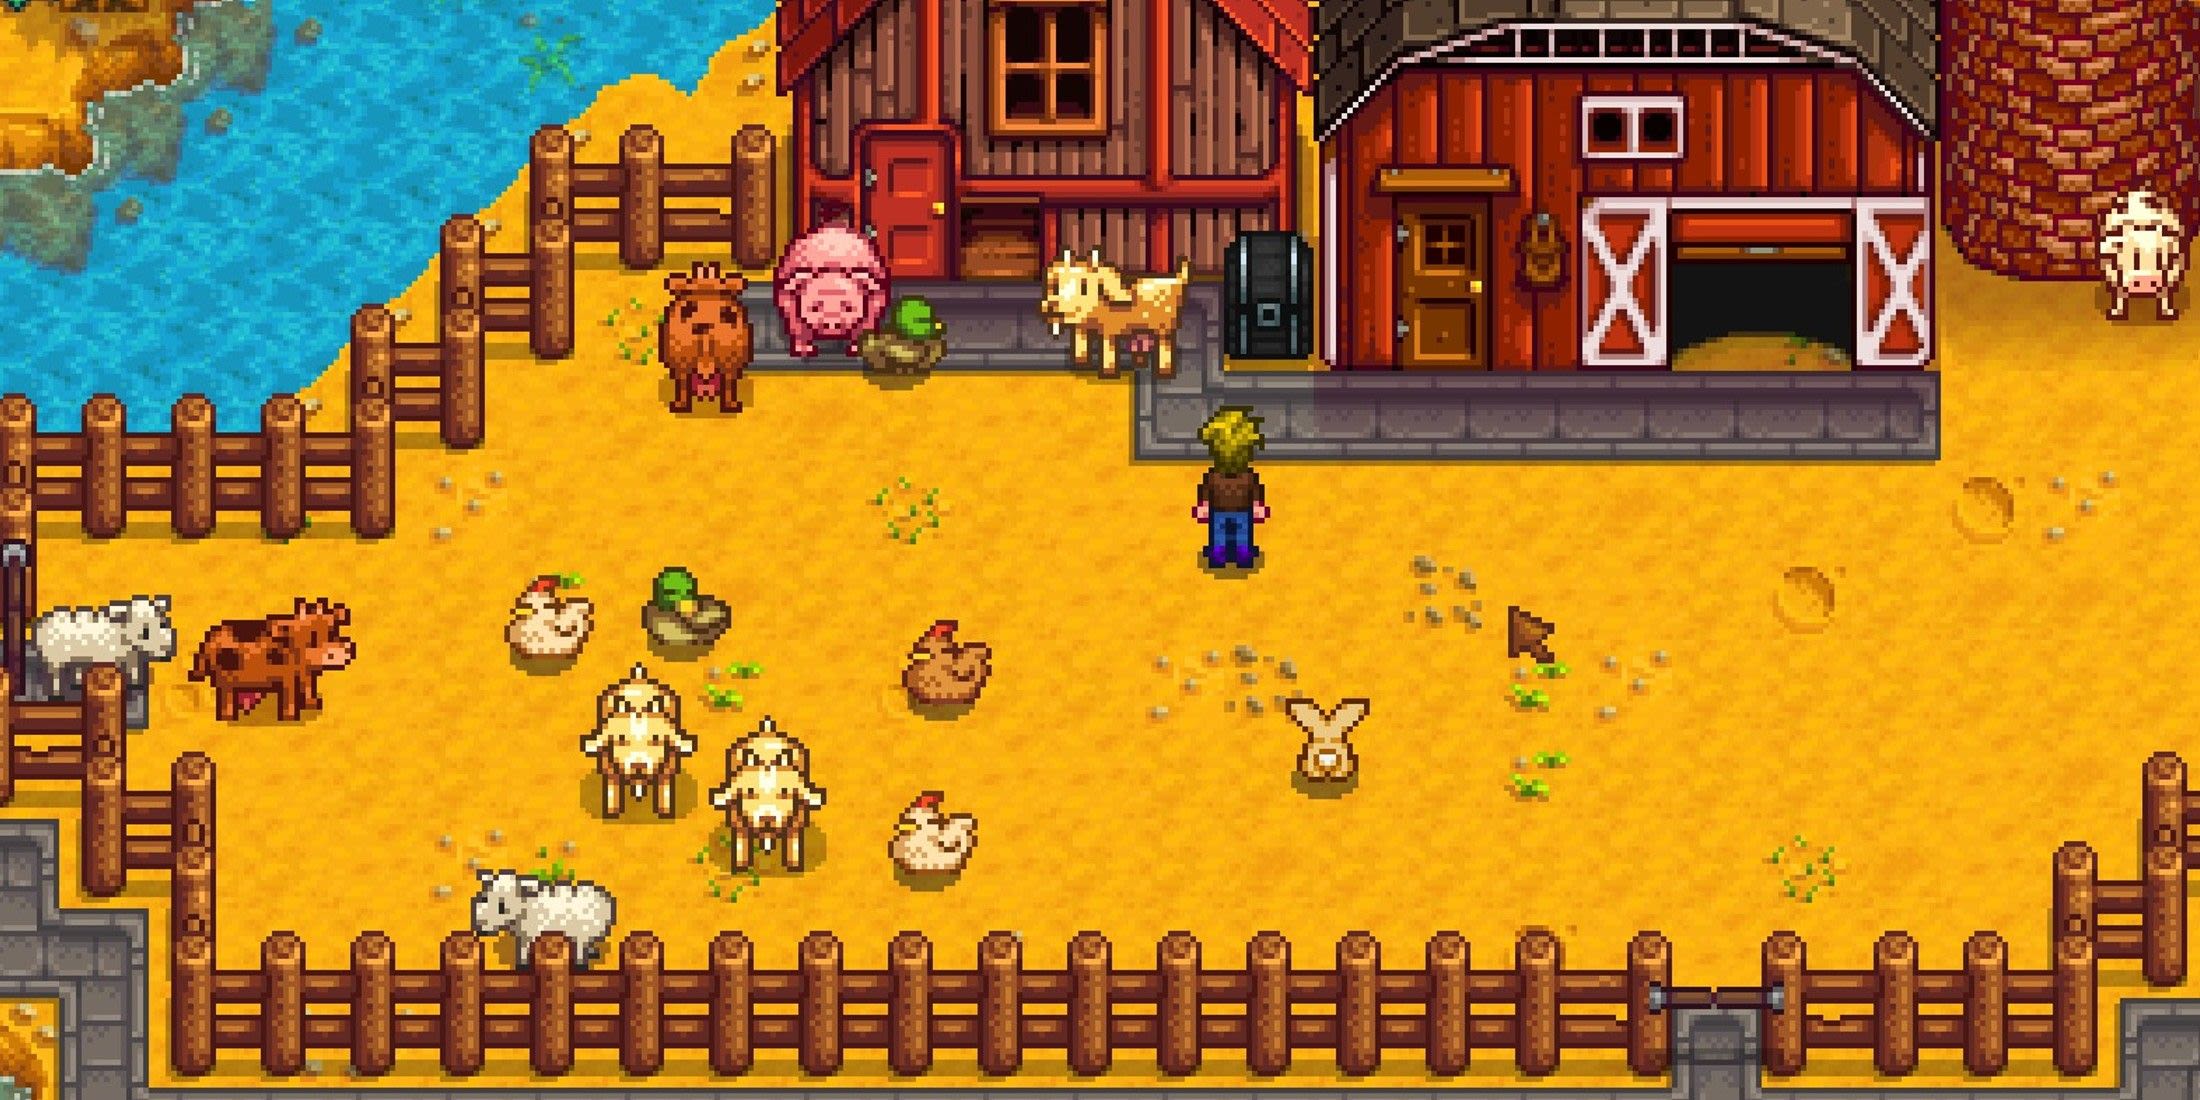 Stardew Valley Player Shares Surprising Animal Discovery